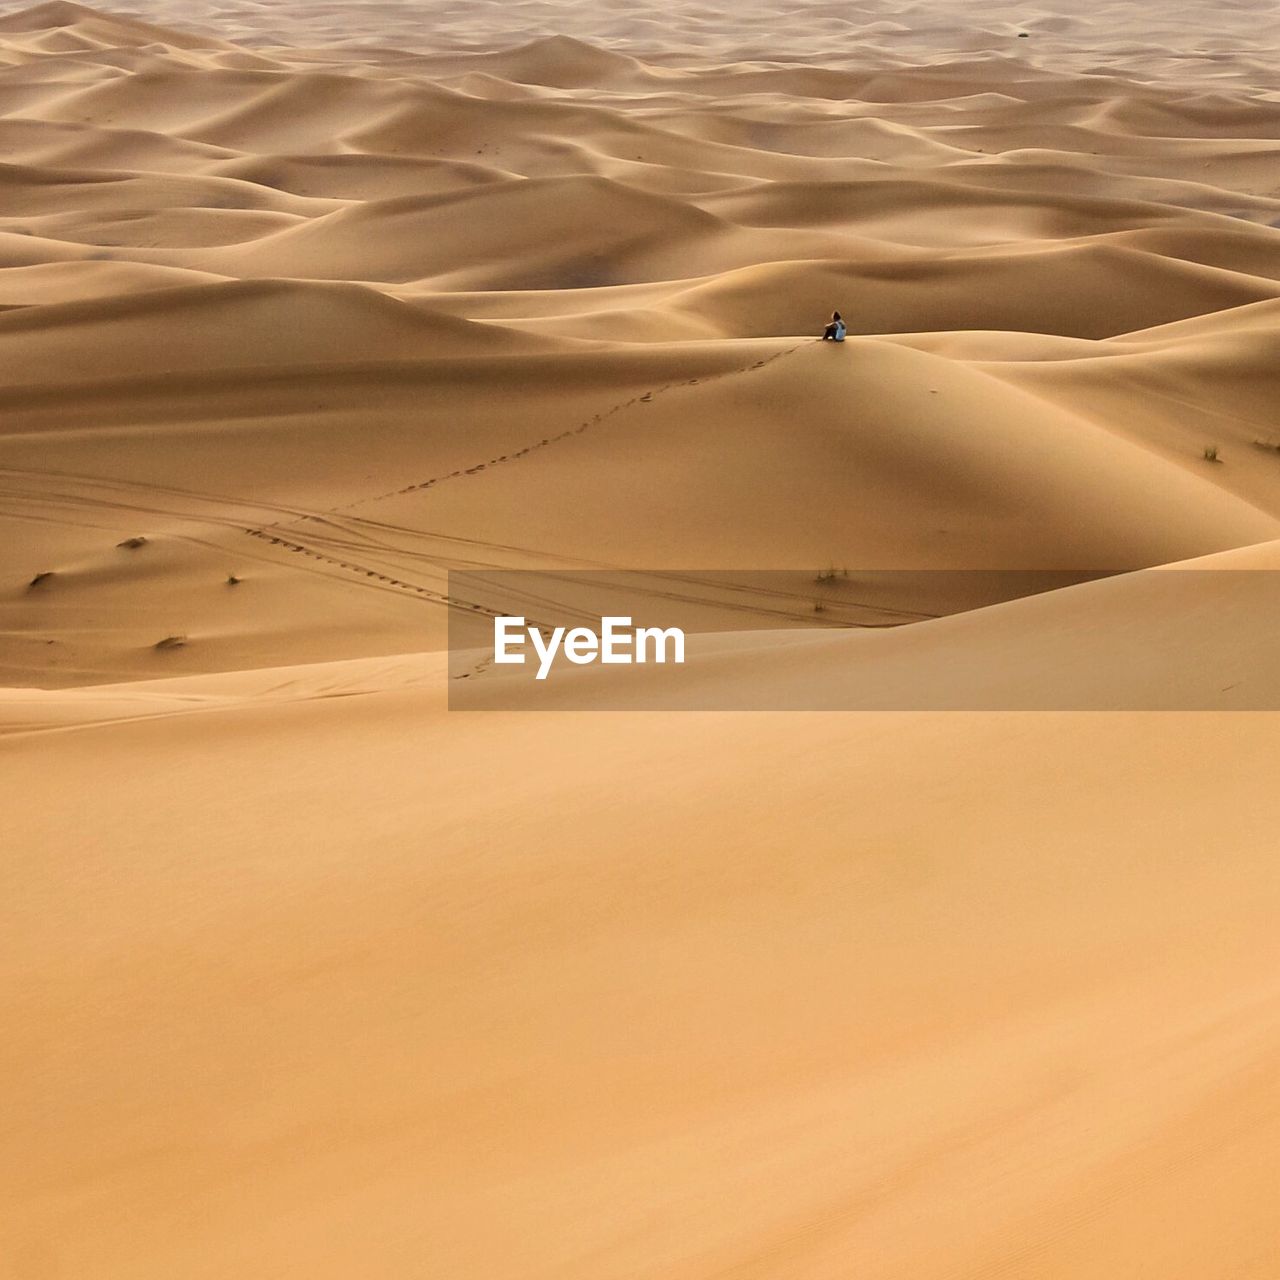 Distant view of man sitting on sand dune in desert